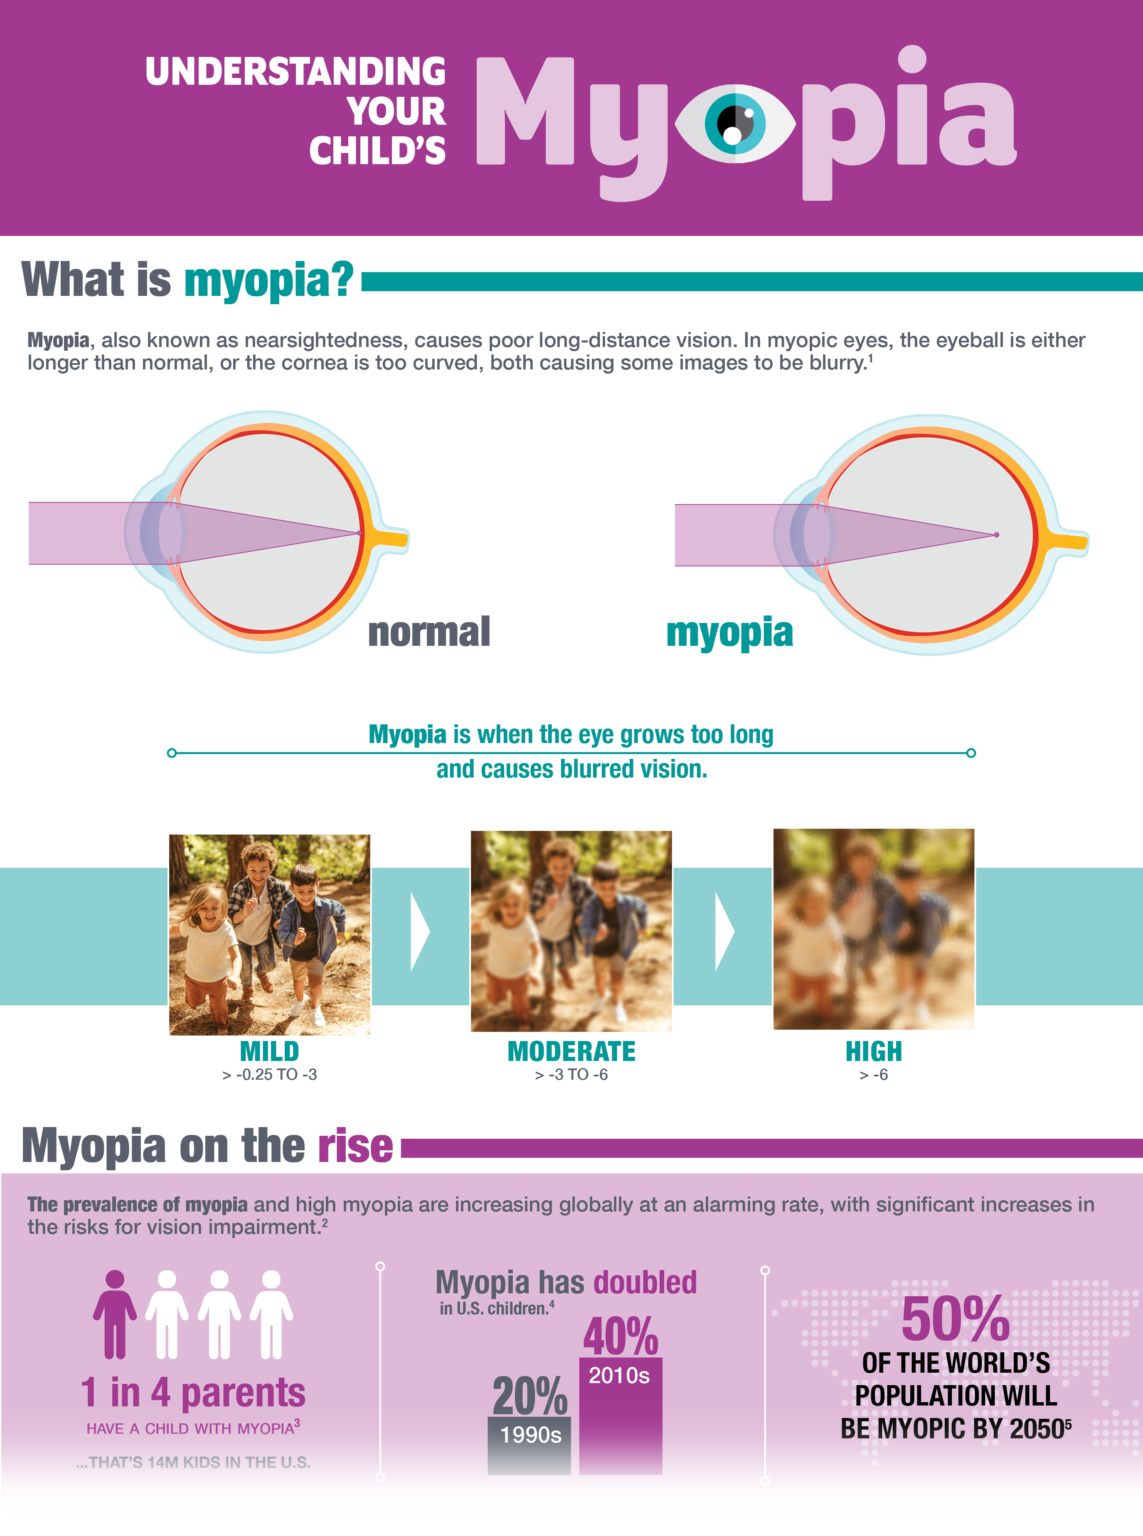 recent research suggests myopia may be caused by